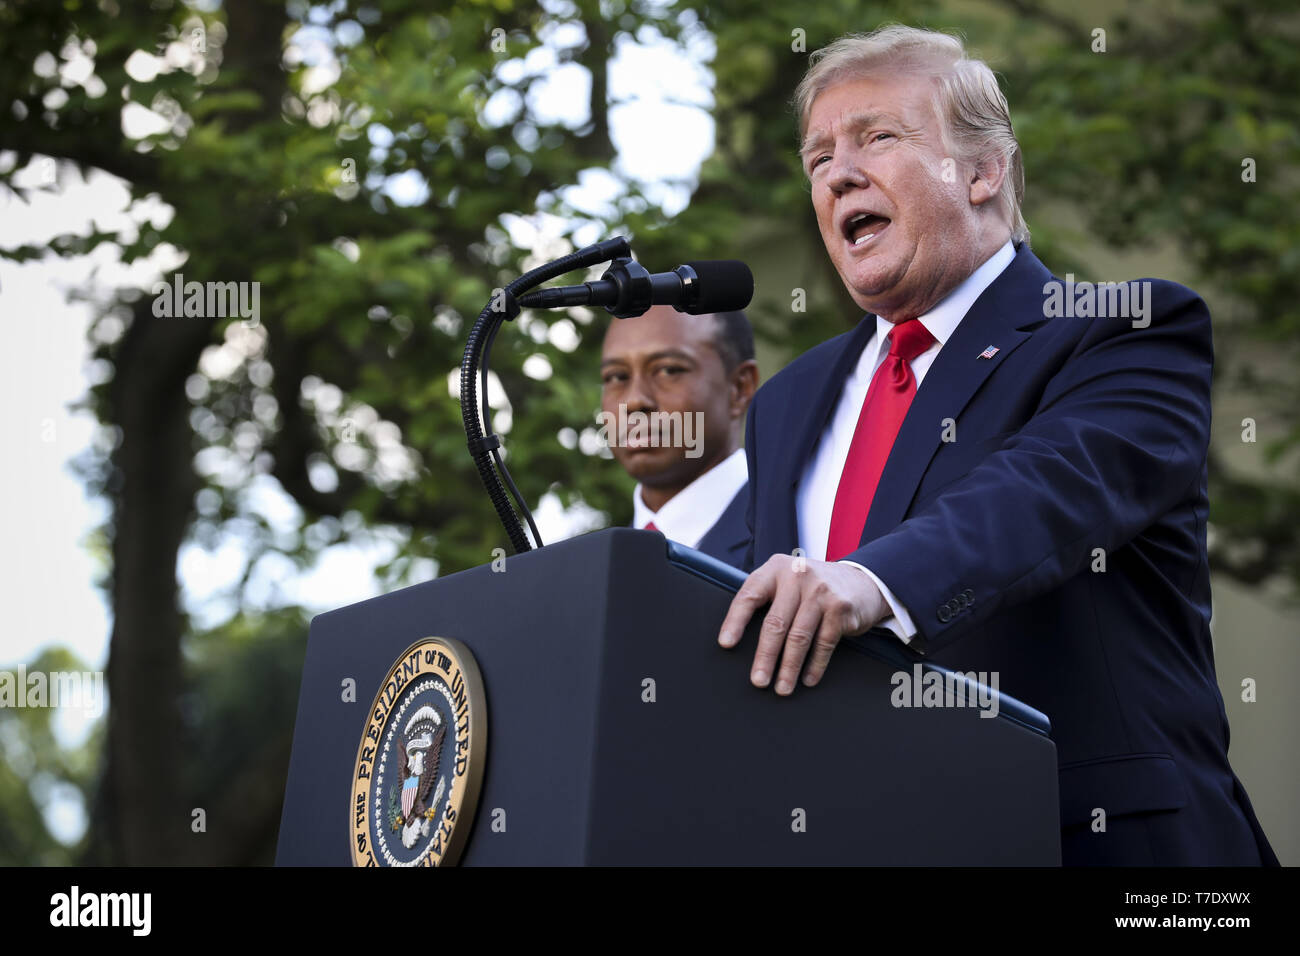 Washington, District of Columbia, USA. 6th May, 2019. United States President Donald J. Trump delivers remarks during a ceremony in the Rose Garden of the White House to present the Presidential Medal of Freedom to Tiger Woods on May 6, 2019 in Washington, DC. Credit: Oliver Contreras/Pool via CNP Credit: Oliver Contreras/CNP/ZUMA Wire/Alamy Live News Stock Photo